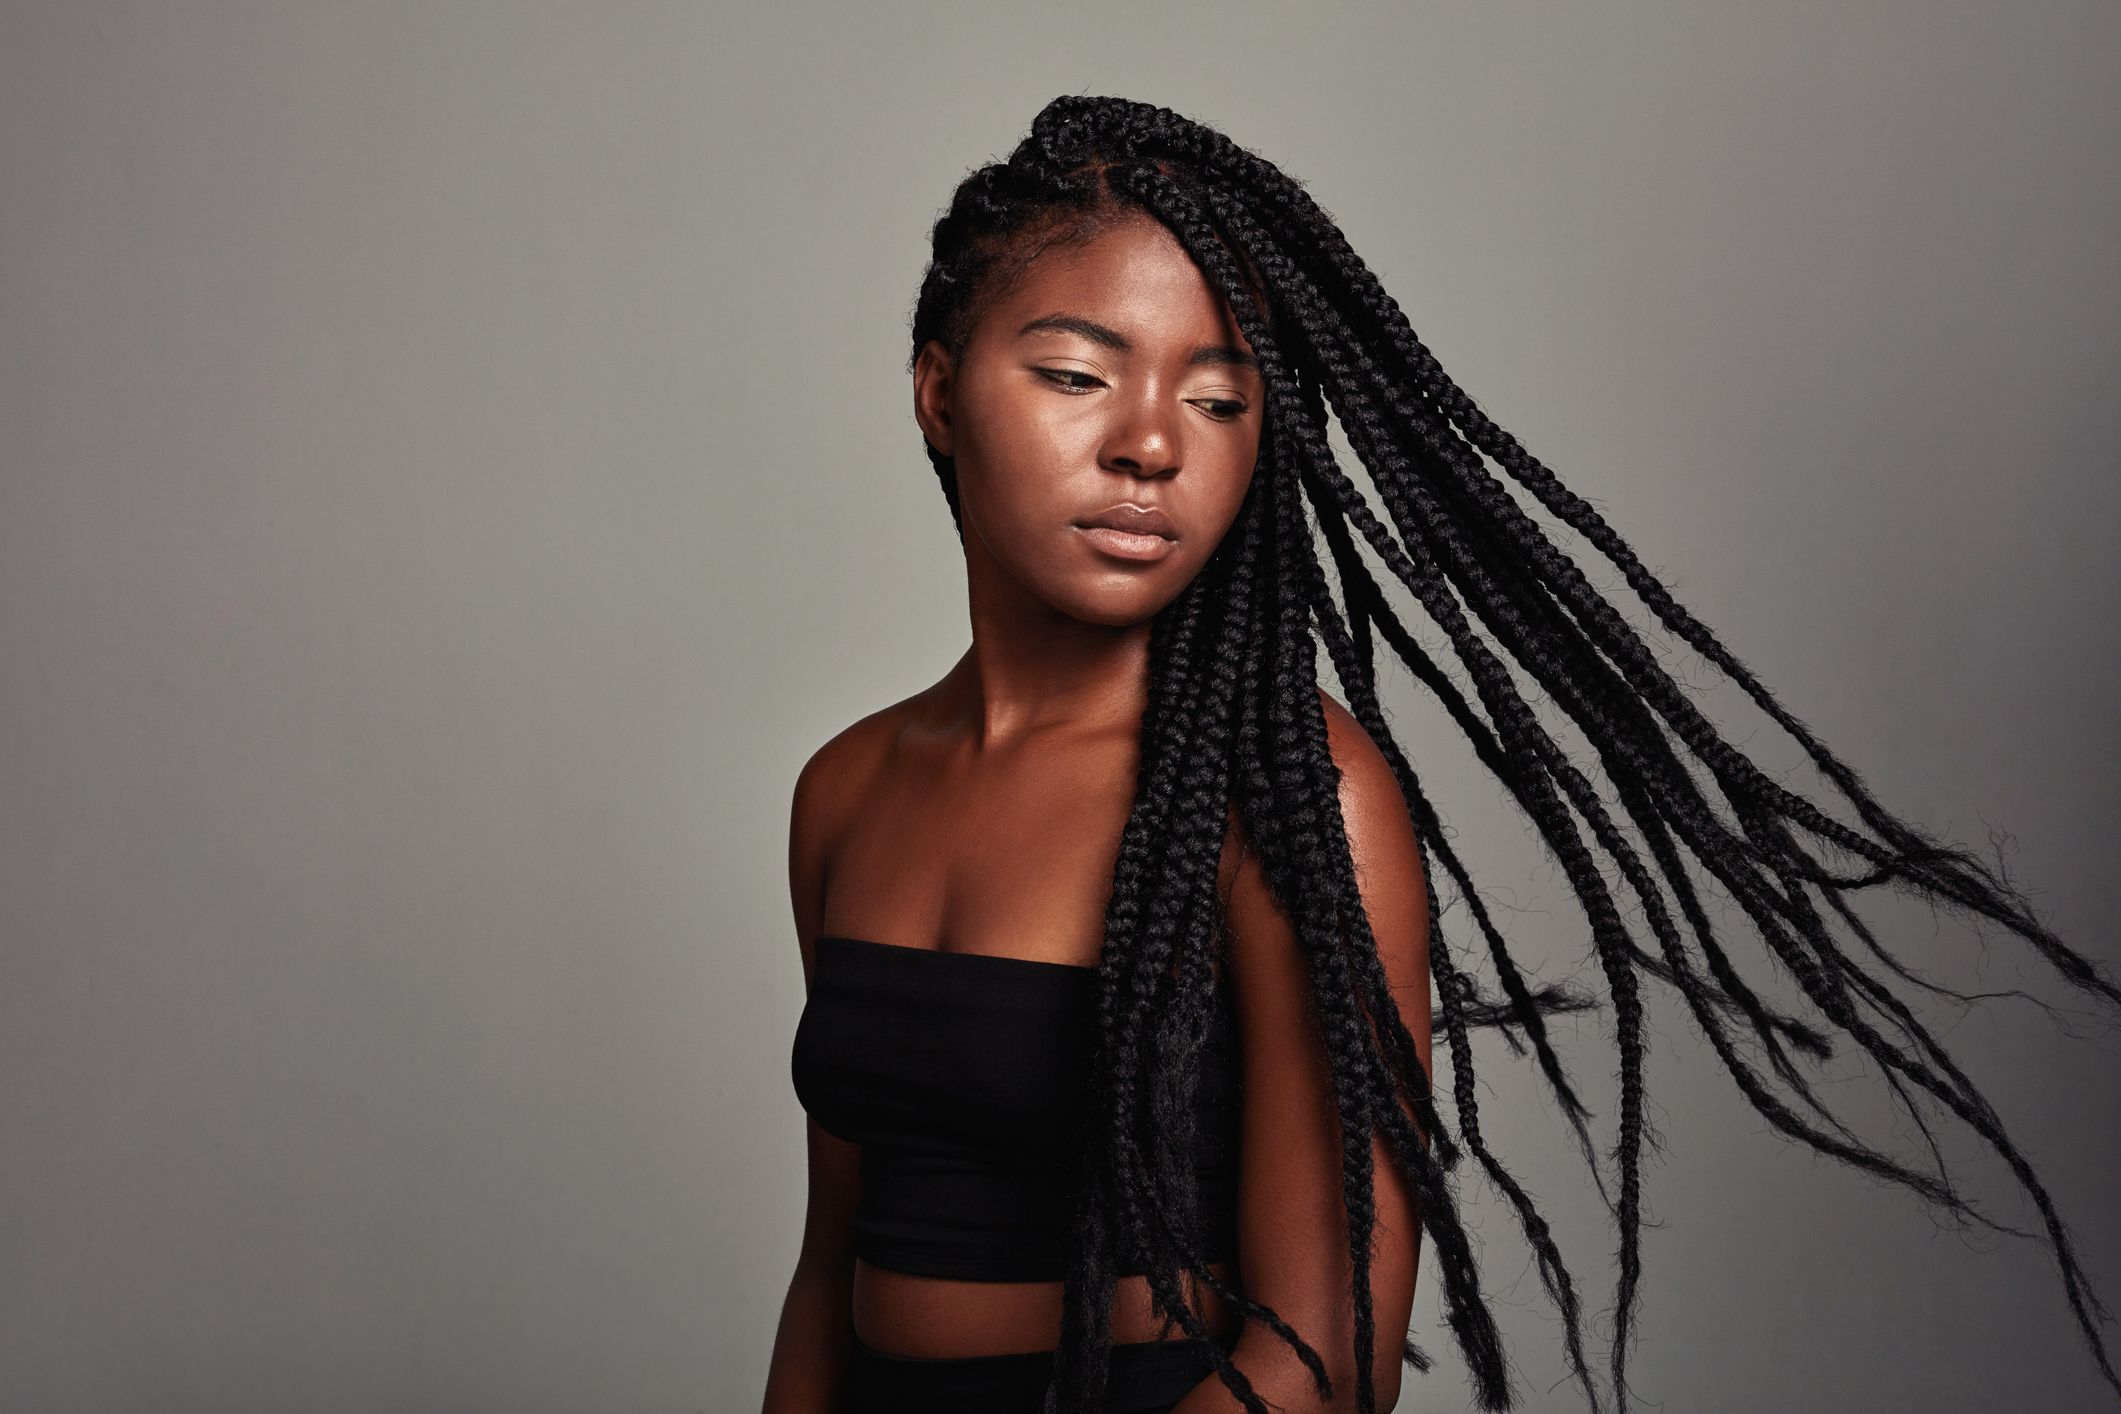 50 Exquisite Box Braids Hairstyles That Really Impress